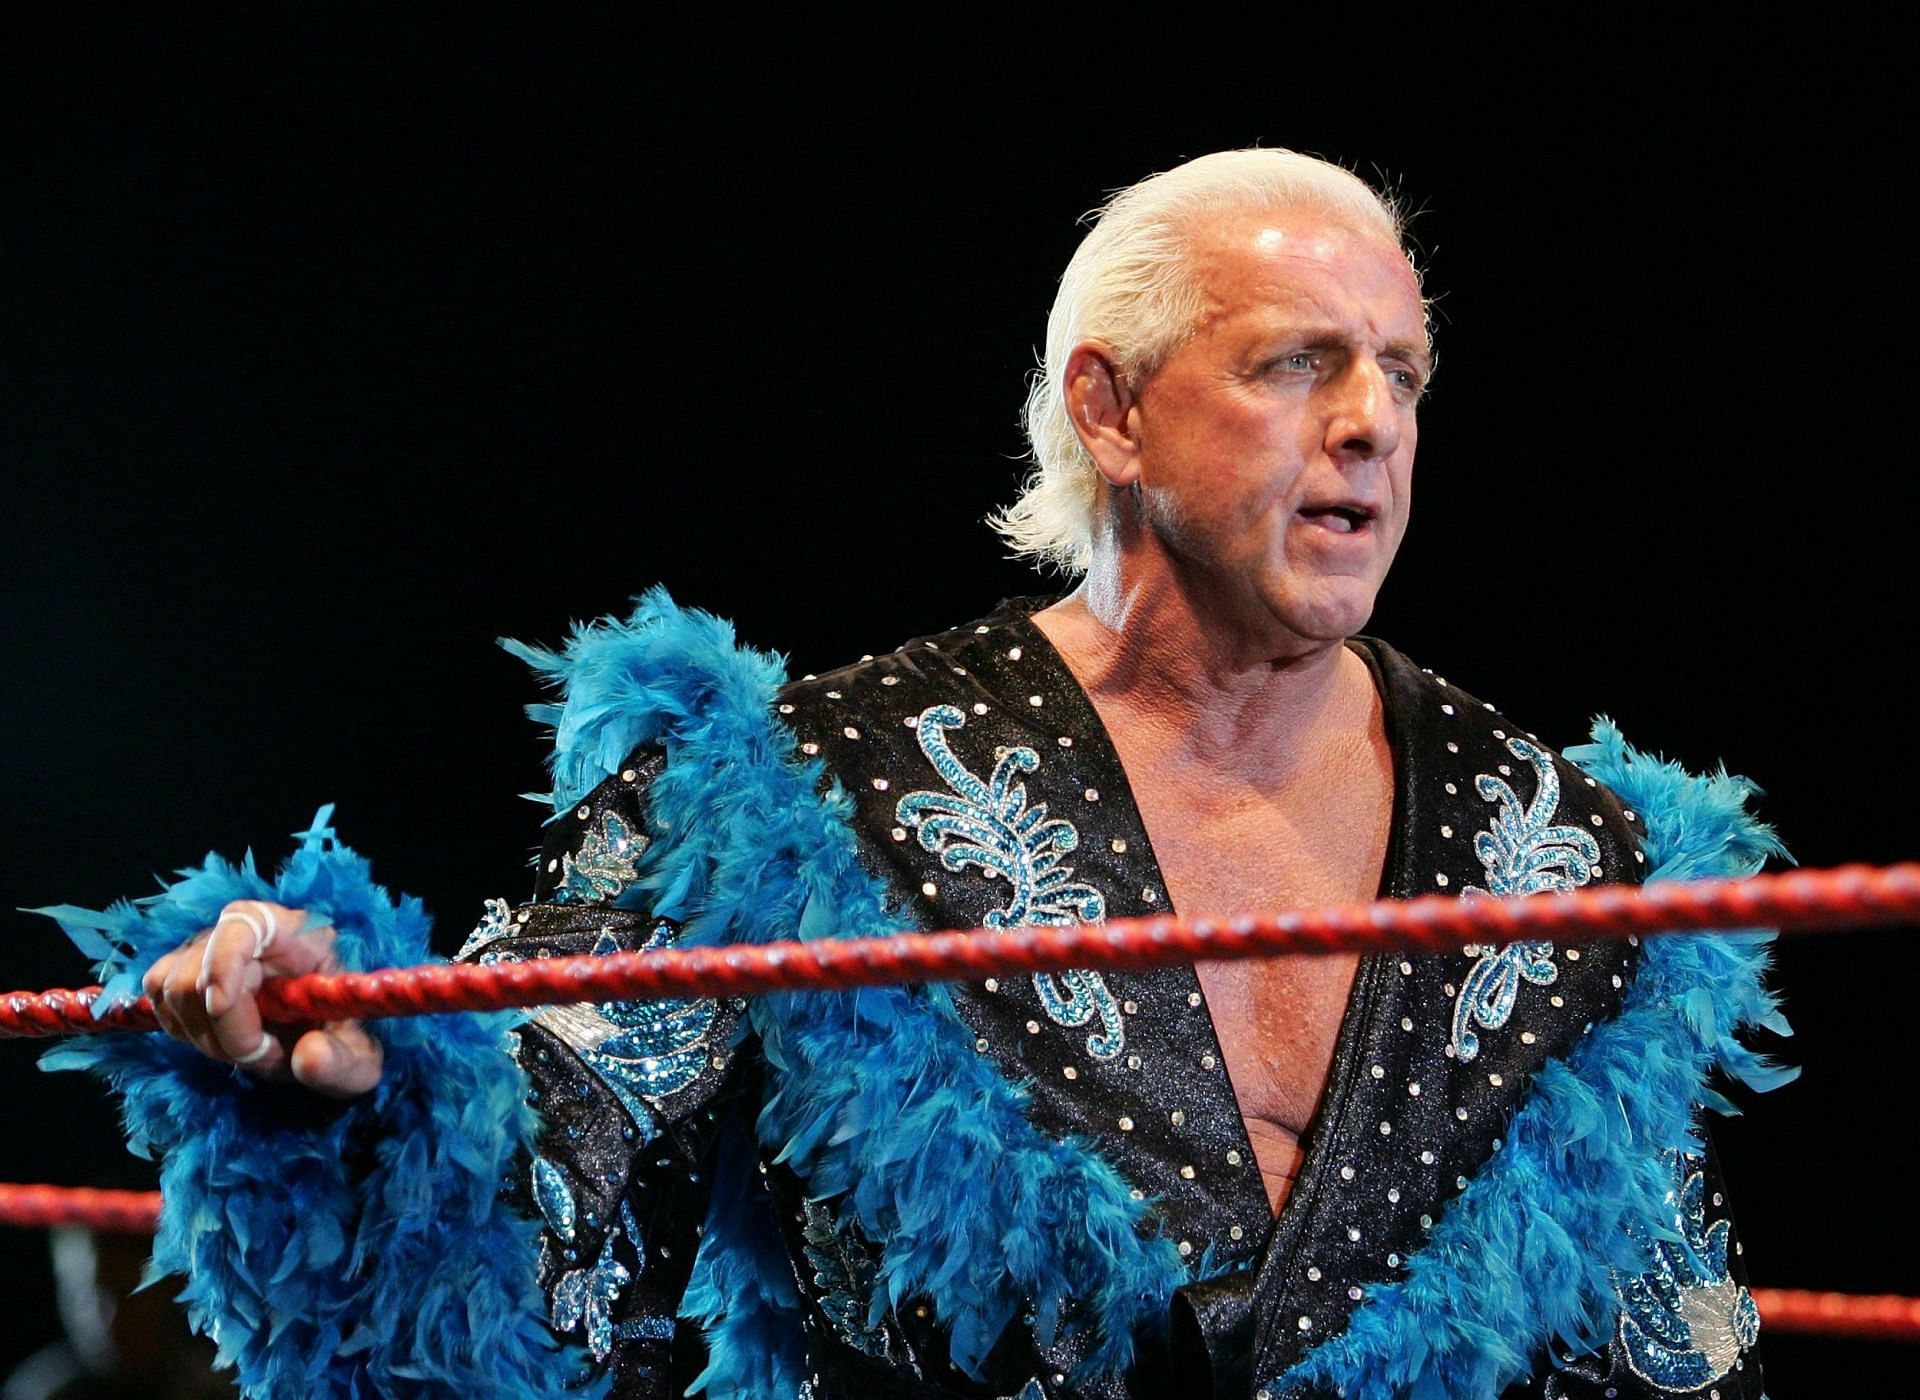 The Nature Boy finally has his opponent for July 31.